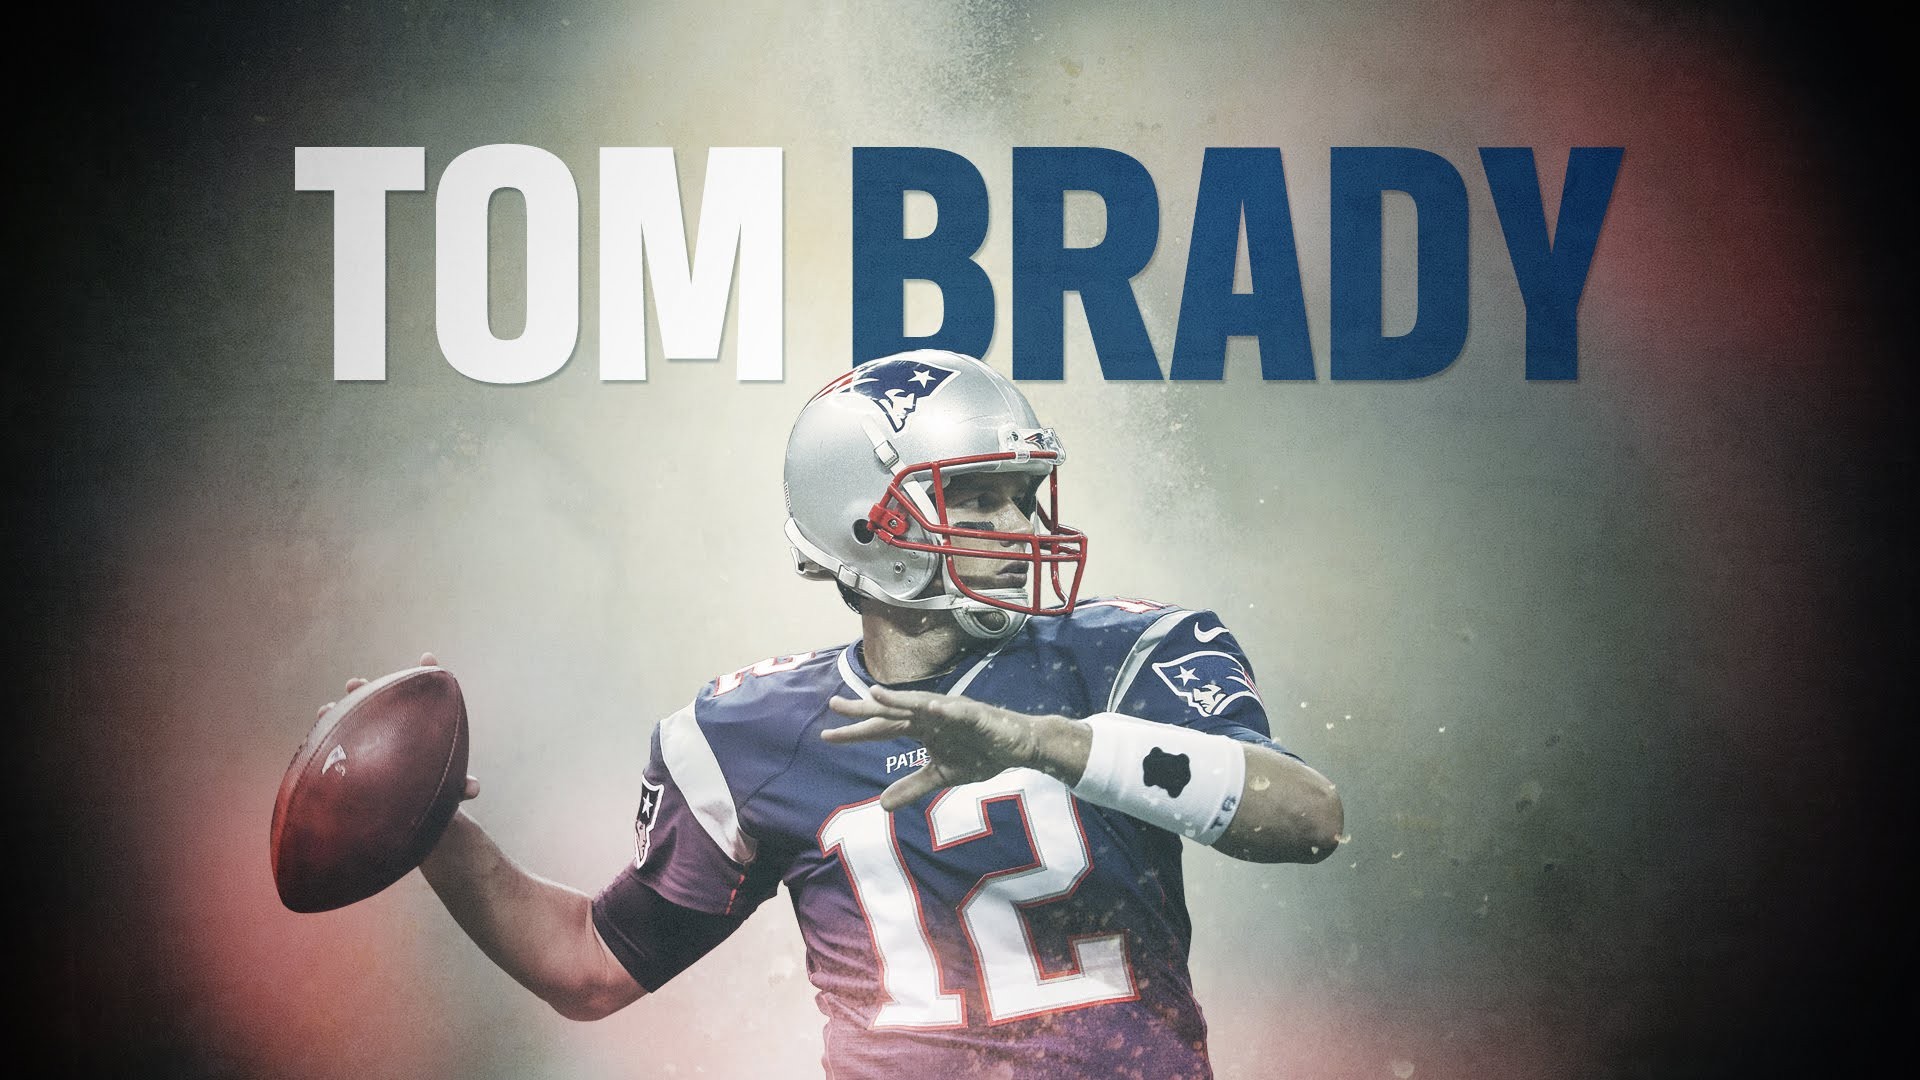 Wallpaper Tom Brady Super Bowl Desktop with image resolution 1920x1080 pixel. You can use this wallpaper as background for your desktop Computer Screensavers, Android or iPhone smartphones